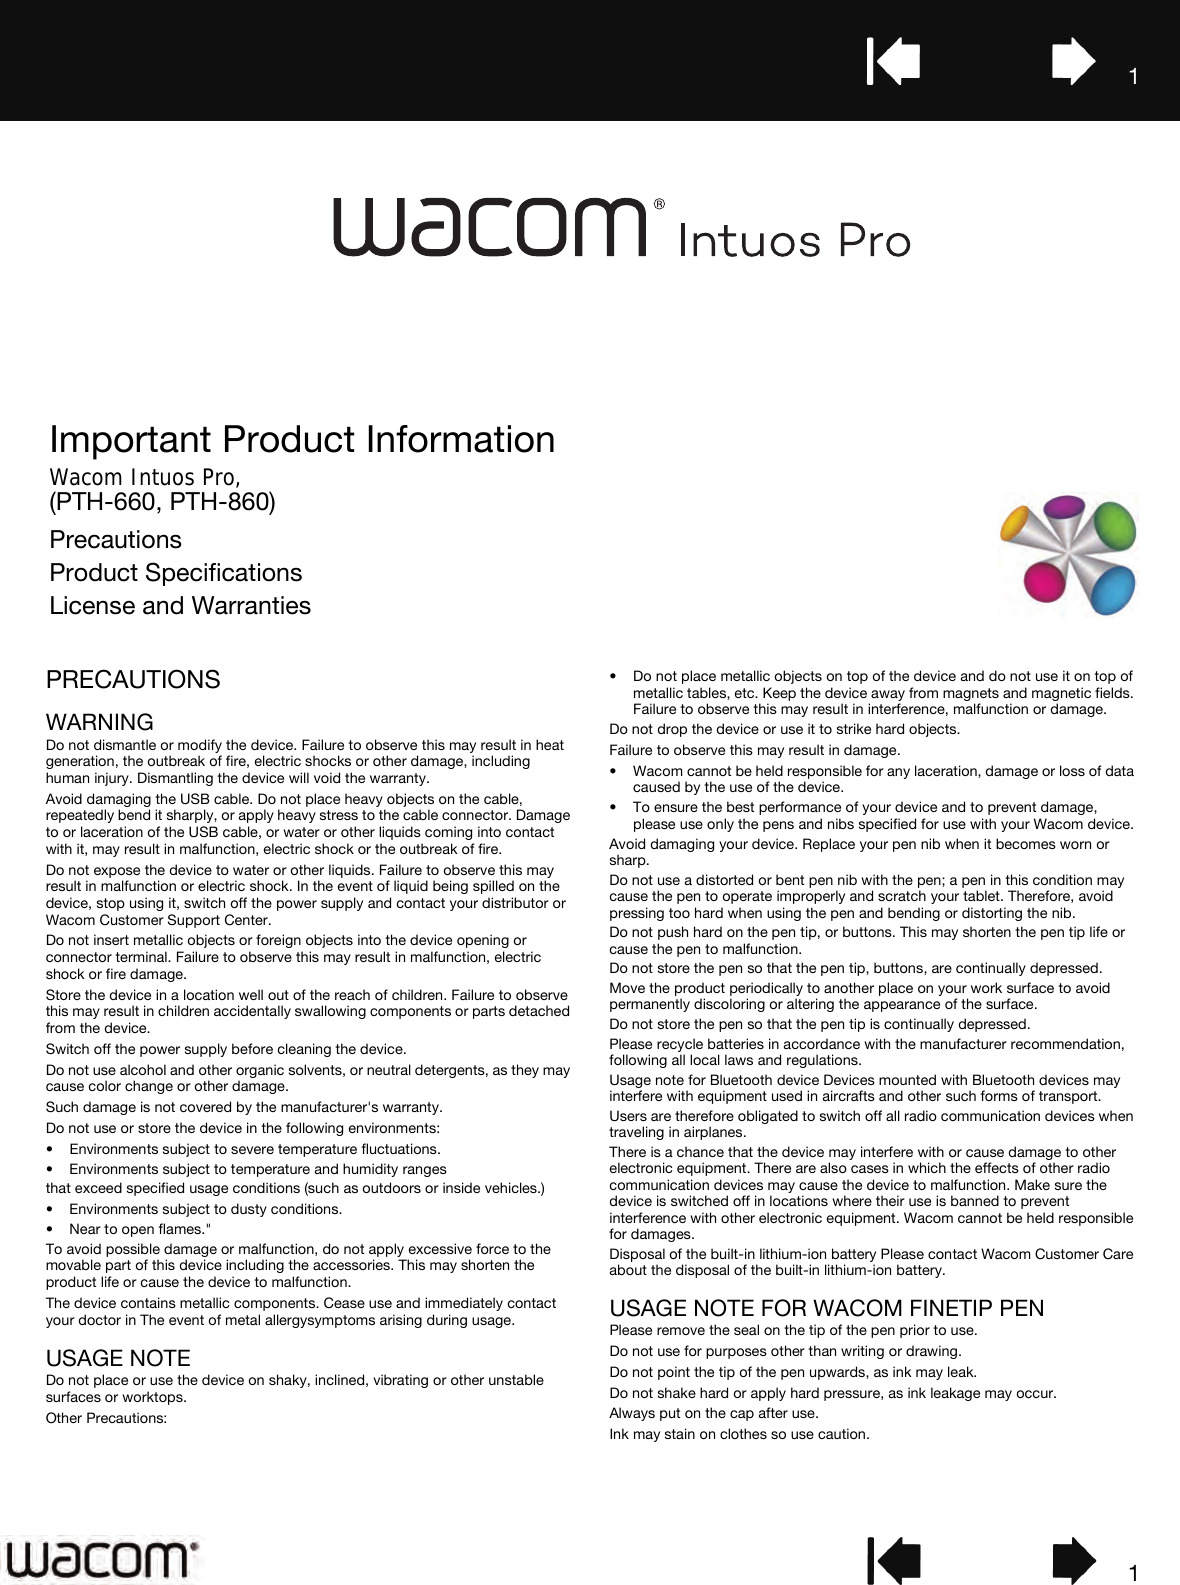 11Important Product InformationWacom Intuos Pro,  (PTH-660, PTH-860)PrecautionsProduct SpecificationsLicense and WarrantiesPRECAUTIONSWARNINGDo not dismantle or modify the device. Failure to observe this may result in heat generation, the outbreak of fire, electric shocks or other damage, including human injury. Dismantling the device will void the warranty.Avoid damaging the USB cable. Do not place heavy objects on the cable, repeatedly bend it sharply, or apply heavy stress to the cable connector. Damage to or laceration of the USB cable, or water or other liquids coming into contact with it, may result in malfunction, electric shock or the outbreak of fire.Do not expose the device to water or other liquids. Failure to observe this may result in malfunction or electric shock. In the event of liquid being spilled on the device, stop using it, switch off the power supply and contact your distributor or Wacom Customer Support Center.Do not insert metallic objects or foreign objects into the device opening or connector terminal. Failure to observe this may result in malfunction, electric shock or fire damage.Store the device in a location well out of the reach of children. Failure to observe this may result in children accidentally swallowing components or parts detached from the device.Switch off the power supply before cleaning the device.Do not use alcohol and other organic solvents, or neutral detergents, as they may cause color change or other damage.Such damage is not covered by the manufacturer&apos;s warranty.Do not use or store the device in the following environments:• Environments subject to severe temperature fluctuations.• Environments subject to temperature and humidity rangesthat exceed specified usage conditions (such as outdoors or inside vehicles.)• Environments subject to dusty conditions.• Near to open flames.&quot;To avoid possible damage or malfunction, do not apply excessive force to the movable part of this device including the accessories. This may shorten the product life or cause the device to malfunction.The device contains metallic components. Cease use and immediately contact your doctor in The event of metal allergysymptoms arising during usage.USAGE NOTEDo not place or use the device on shaky, inclined, vibrating or other unstable surfaces or worktops.Other Precautions:• Do not place metallic objects on top of the device and do not use it on top of metallic tables, etc. Keep the device away from magnets and magnetic fields. Failure to observe this may result in interference, malfunction or damage.Do not drop the device or use it to strike hard objects.Failure to observe this may result in damage.• Wacom cannot be held responsible for any laceration, damage or loss of data caused by the use of the device.• To ensure the best performance of your device and to prevent damage, please use only the pens and nibs specified for use with your Wacom device.Avoid damaging your device. Replace your pen nib when it becomes worn or sharp.Do not use a distorted or bent pen nib with the pen; a pen in this condition may cause the pen to operate improperly and scratch your tablet. Therefore, avoid pressing too hard when using the pen and bending or distorting the nib.Do not push hard on the pen tip, or buttons. This may shorten the pen tip life or cause the pen to malfunction.Do not store the pen so that the pen tip, buttons, are continually depressed.Move the product periodically to another place on your work surface to avoid permanently discoloring or altering the appearance of the surface.Do not store the pen so that the pen tip is continually depressed.Please recycle batteries in accordance with the manufacturer recommendation, following all local laws and regulations.Usage note for Bluetooth device Devices mounted with Bluetooth devices may interfere with equipment used in aircrafts and other such forms of transport.Users are therefore obligated to switch off all radio communication devices when traveling in airplanes.There is a chance that the device may interfere with or cause damage to other electronic equipment. There are also cases in which the effects of other radio communication devices may cause the device to malfunction. Make sure the device is switched off in locations where their use is banned to prevent interference with other electronic equipment. Wacom cannot be held responsible for damages.Disposal of the built-in lithium-ion battery Please contact Wacom Customer Care about the disposal of the built-in lithium-ion battery.USAGE NOTE FOR WACOM FINETIP PEN Please remove the seal on the tip of the pen prior to use.Do not use for purposes other than writing or drawing.Do not point the tip of the pen upwards, as ink may leak.Do not shake hard or apply hard pressure, as ink leakage may occur.Always put on the cap after use.Ink may stain on clothes so use caution.